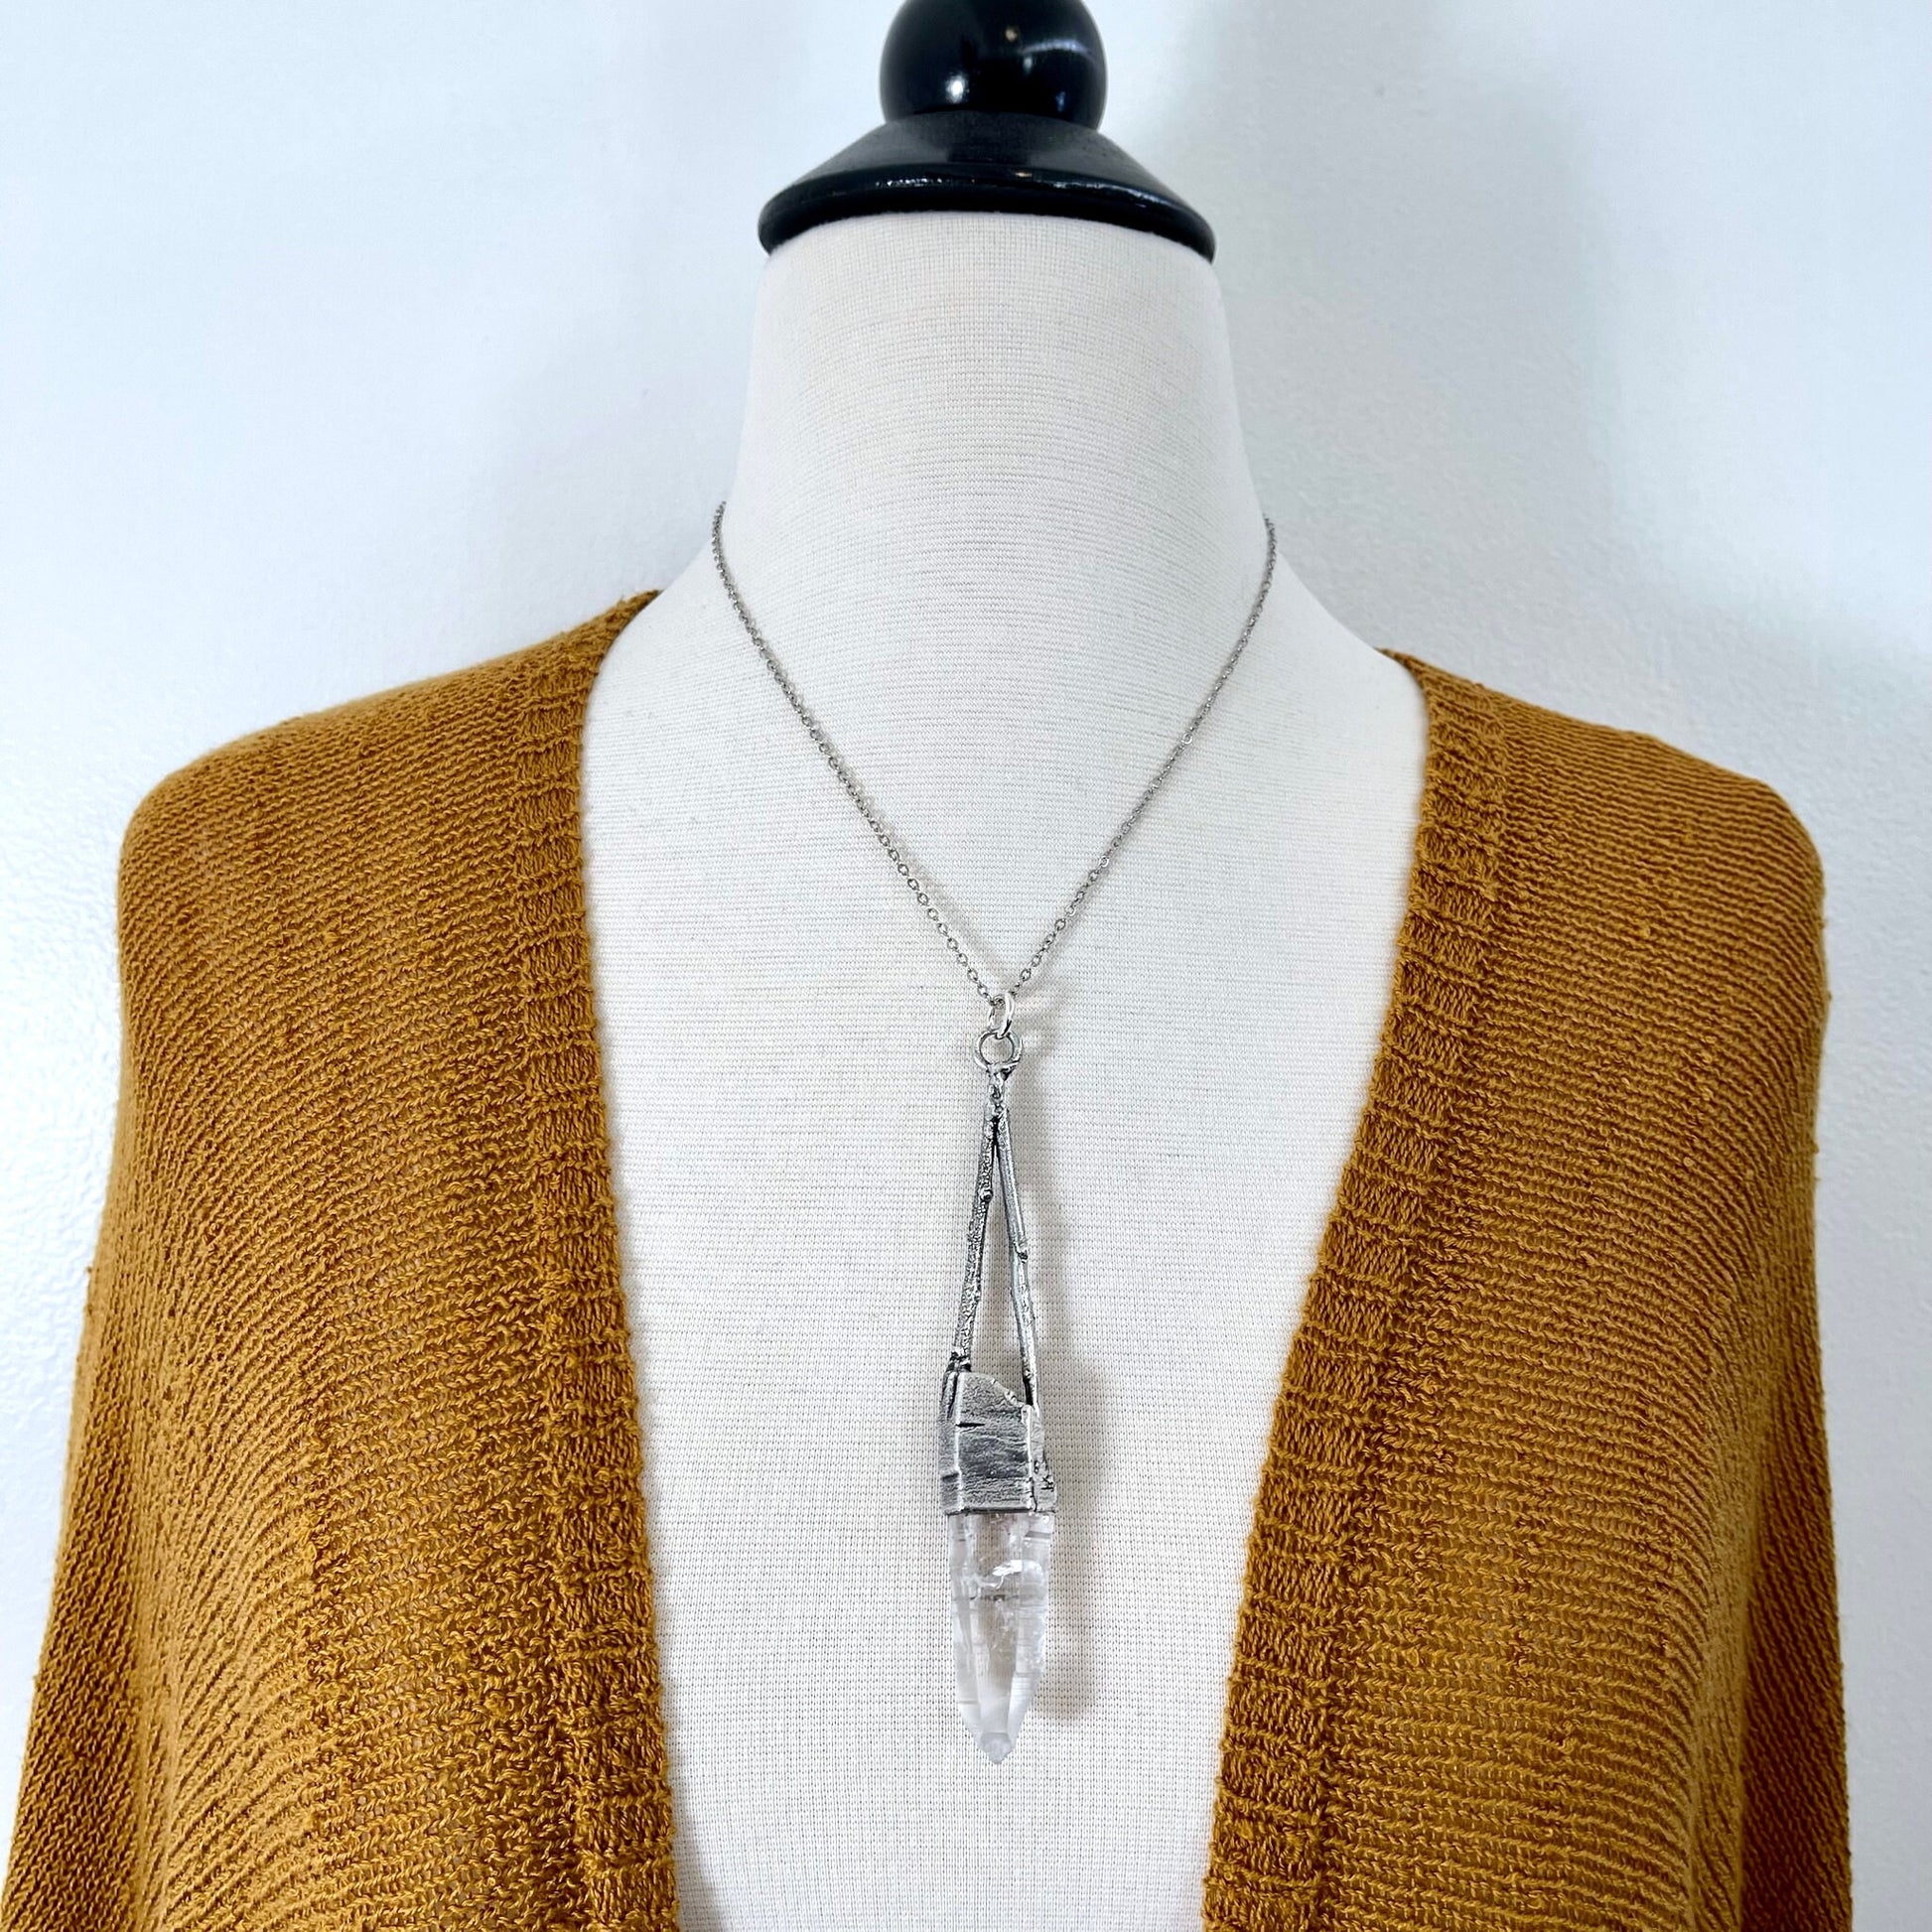 big crystal Necklace, Big Gothic Necklace, Bohemian Jewelry, Crystal Necklaces, Crystal Pendant, Etsy ID: 1650768126, FOXLARK- NECKLACES, Jewelry, nature inspired, Necklaces, Quartz Jewelry, Silver Jewelry, Silver Necklace, Silver Stone Jewelry, Statement